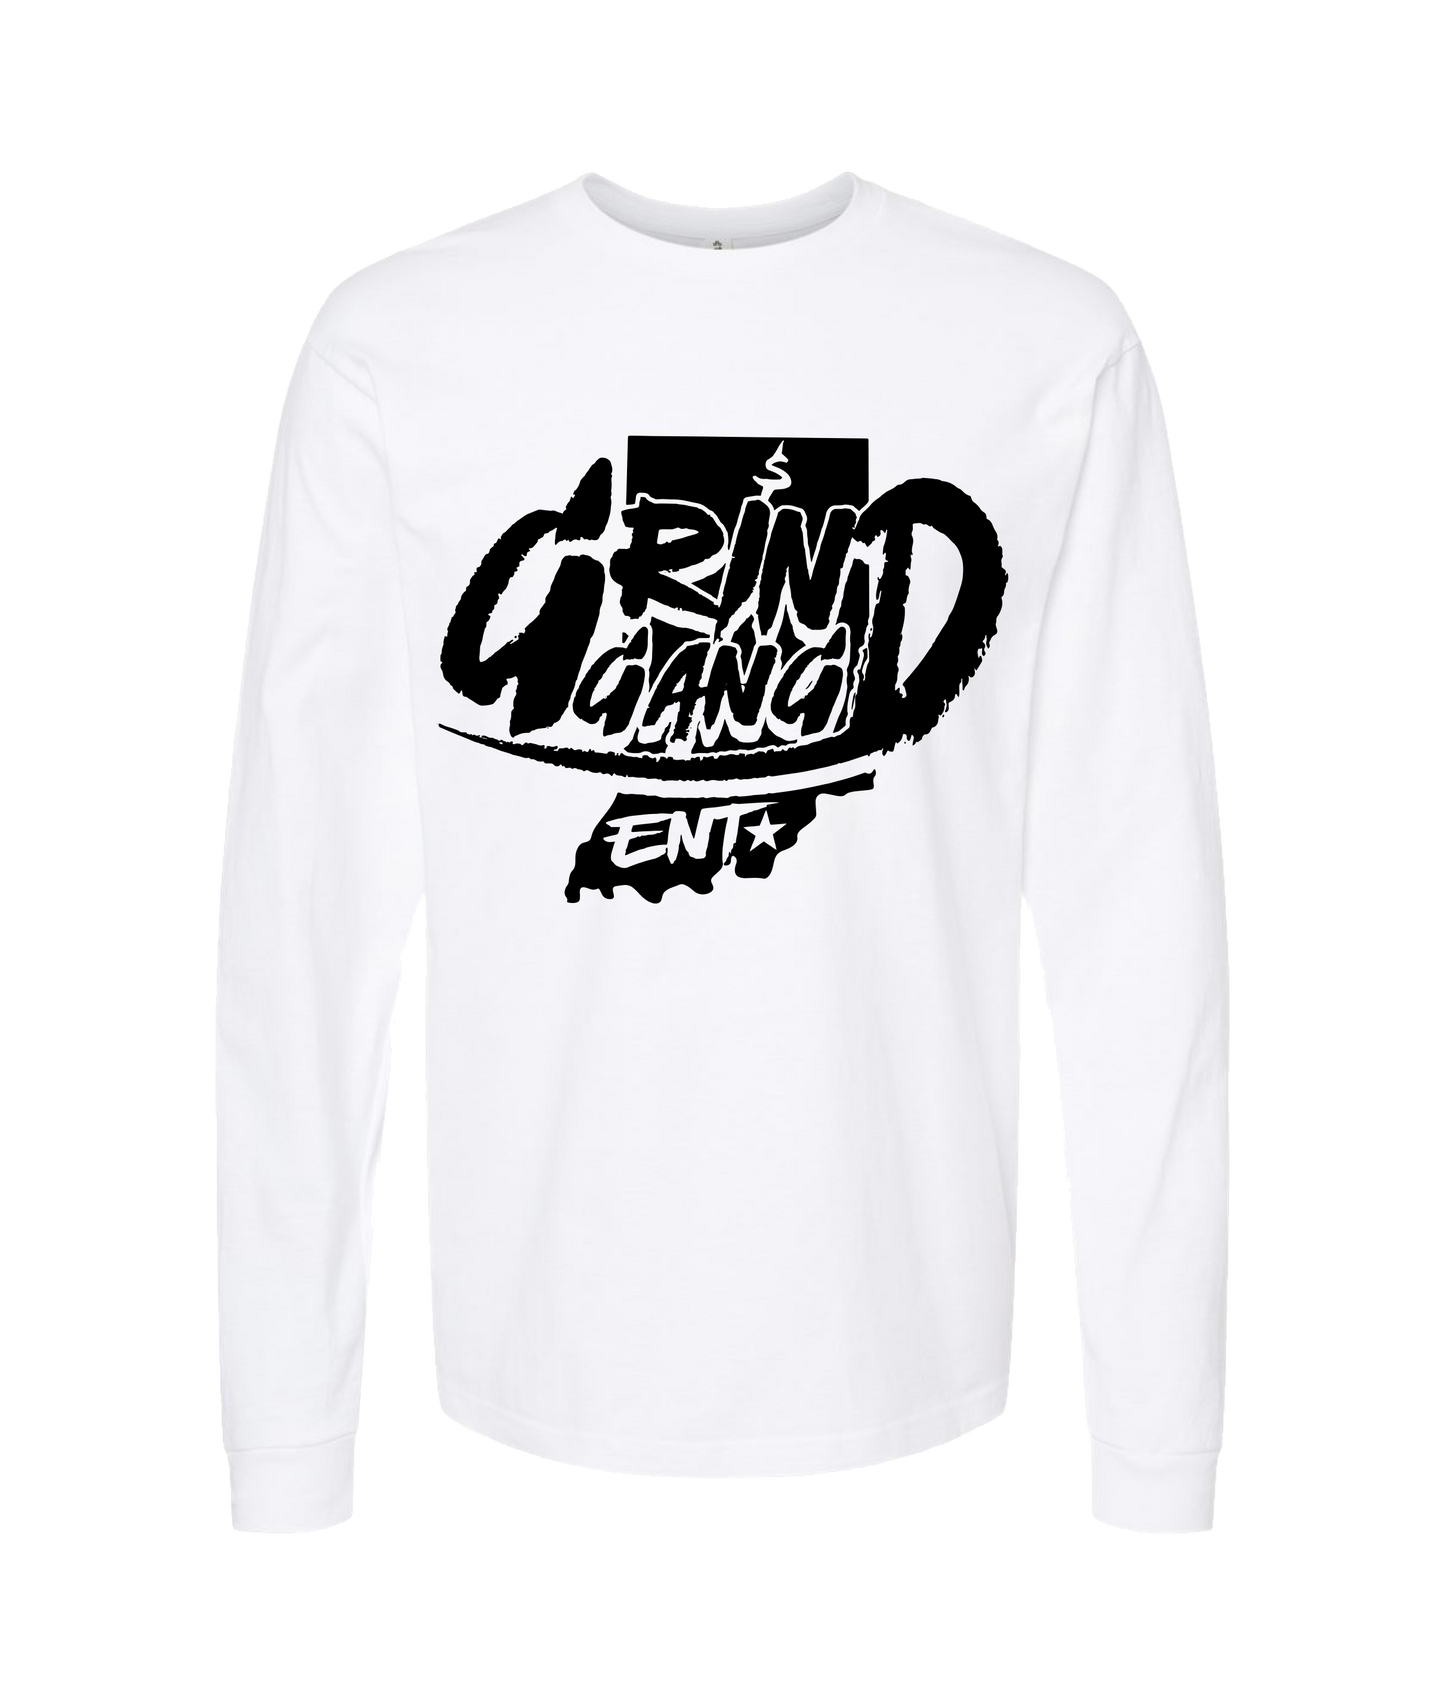 V-GGETOP - INDIANA GRIND 2 - White Long Sleeve T